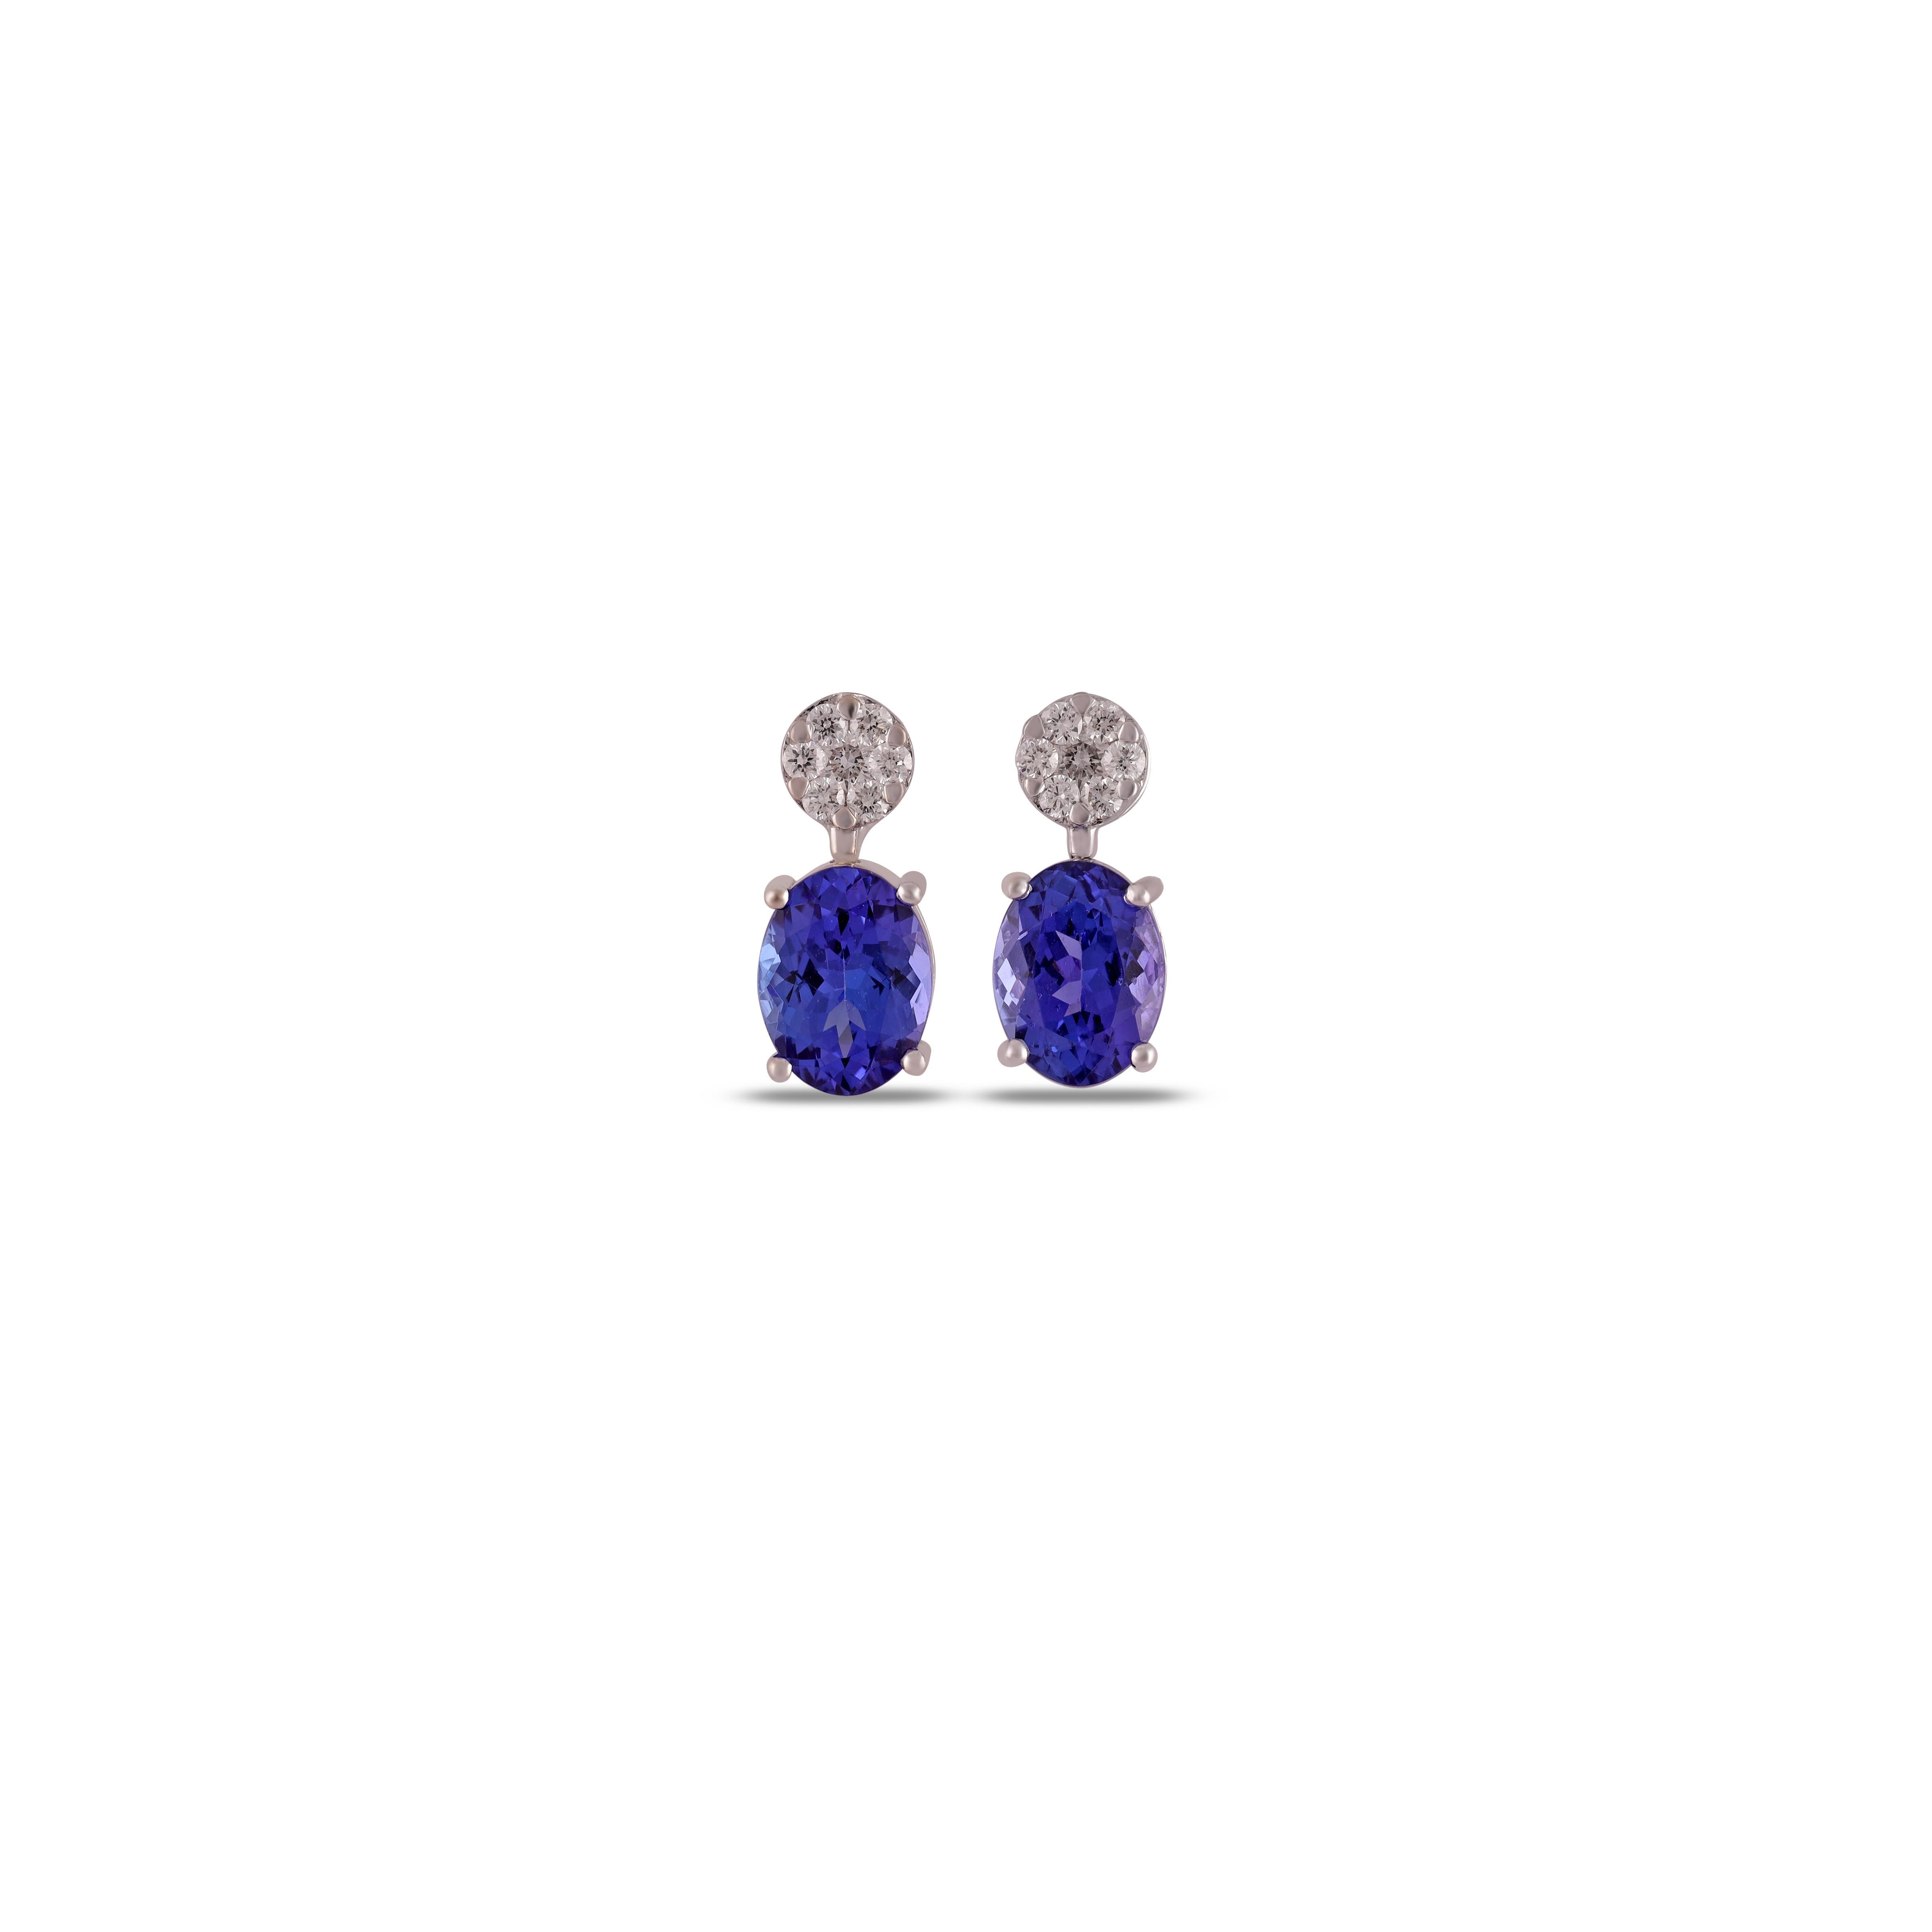 These are an elegant Royal  blue Tanzanite & diamond stud earrings studded in 18k gold features 2 pieces of oval shaped Royal blue Tanzanite  weight 2.73 carats with diamonds weight 0.24 carats, This entire earring pair made of 18k gold, These